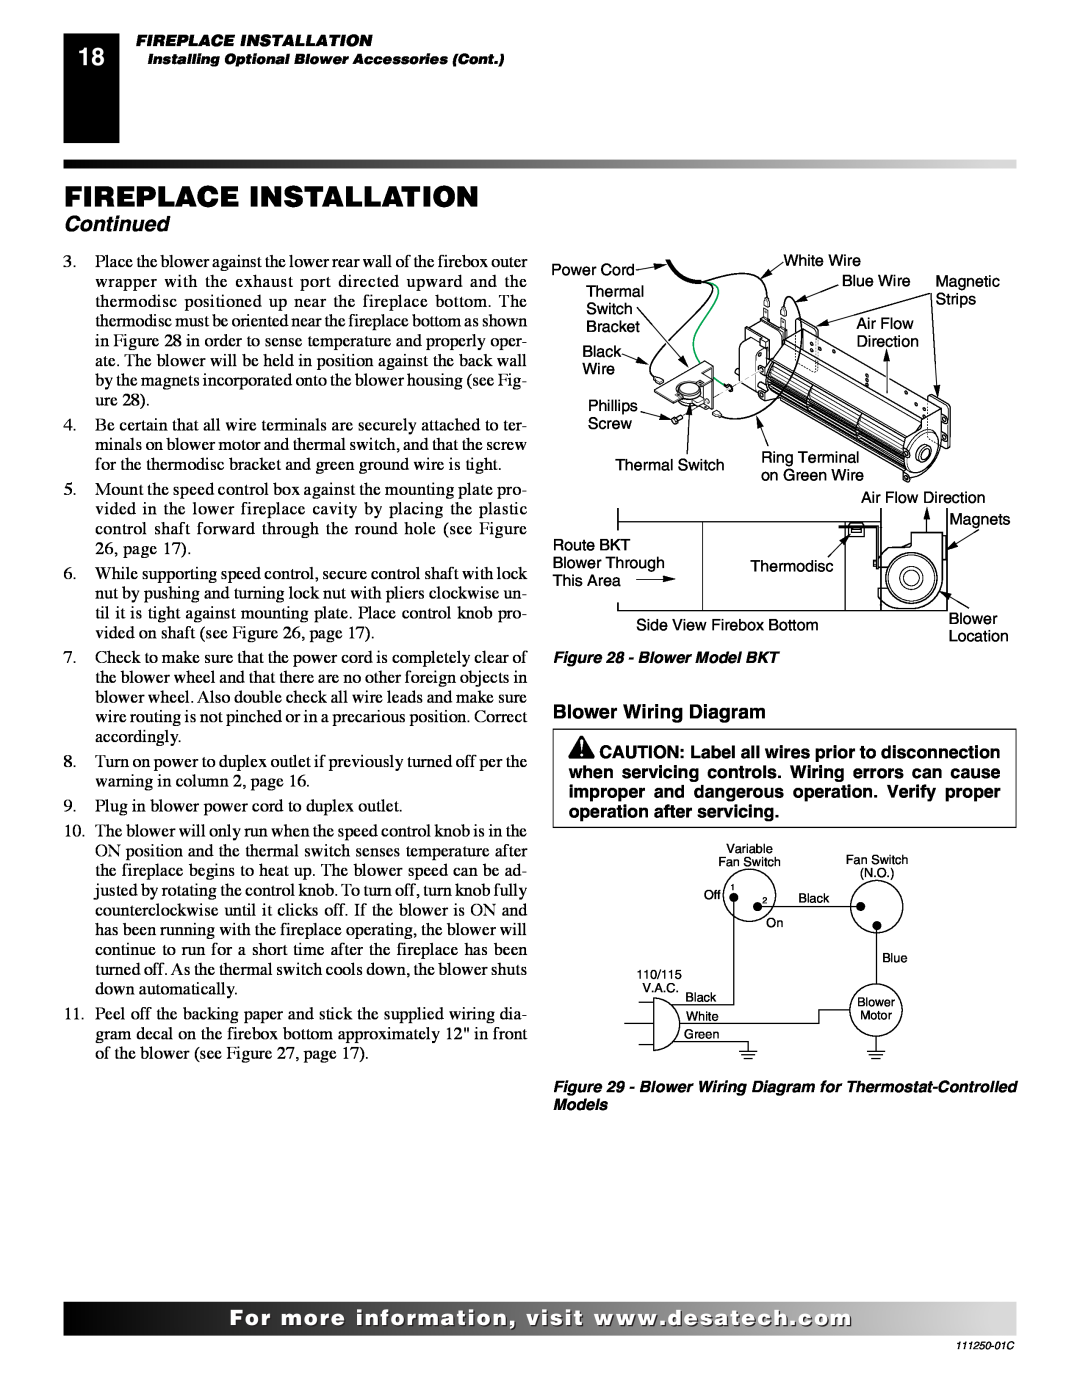 Desa (V)T36NA SERIES installation manual Fireplace Installation, Continued, Blower Wiring Diagram 